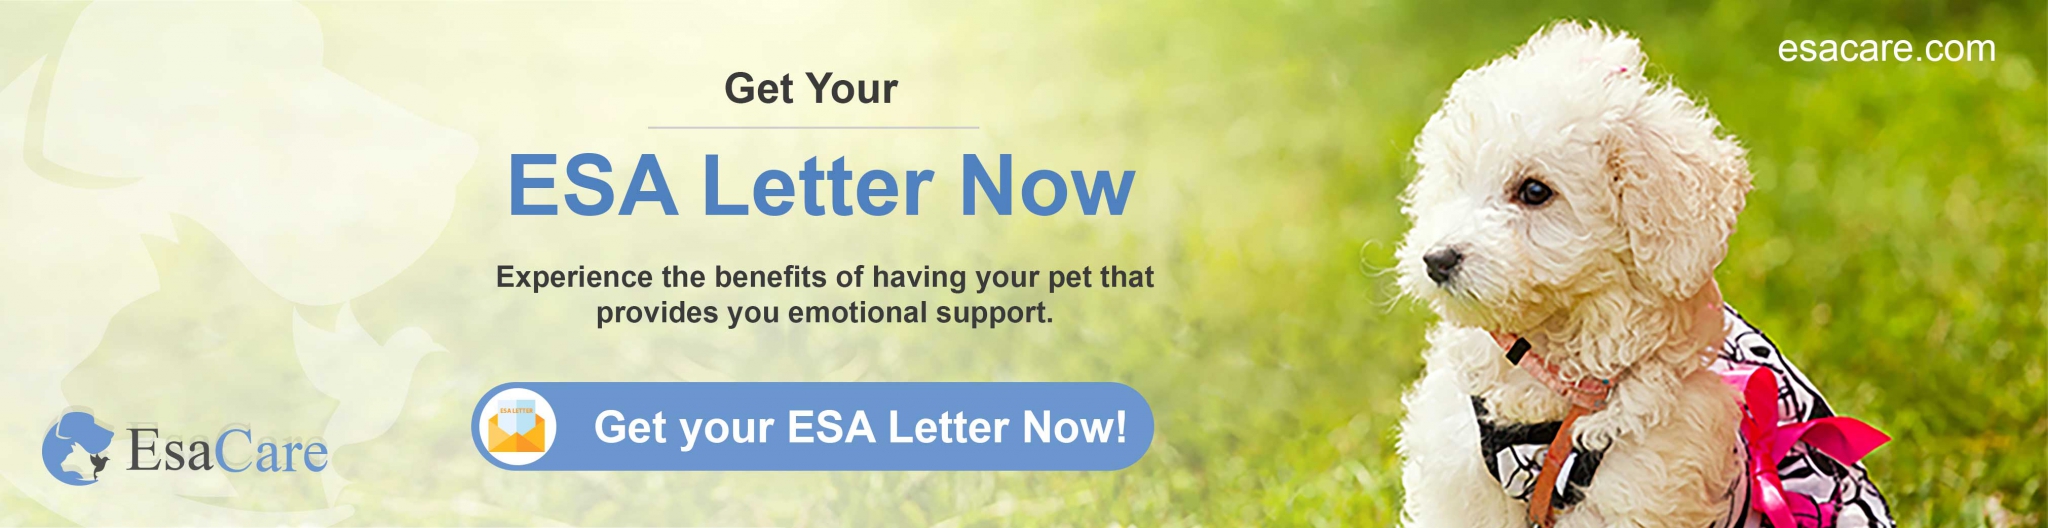 Get your ESA letter now